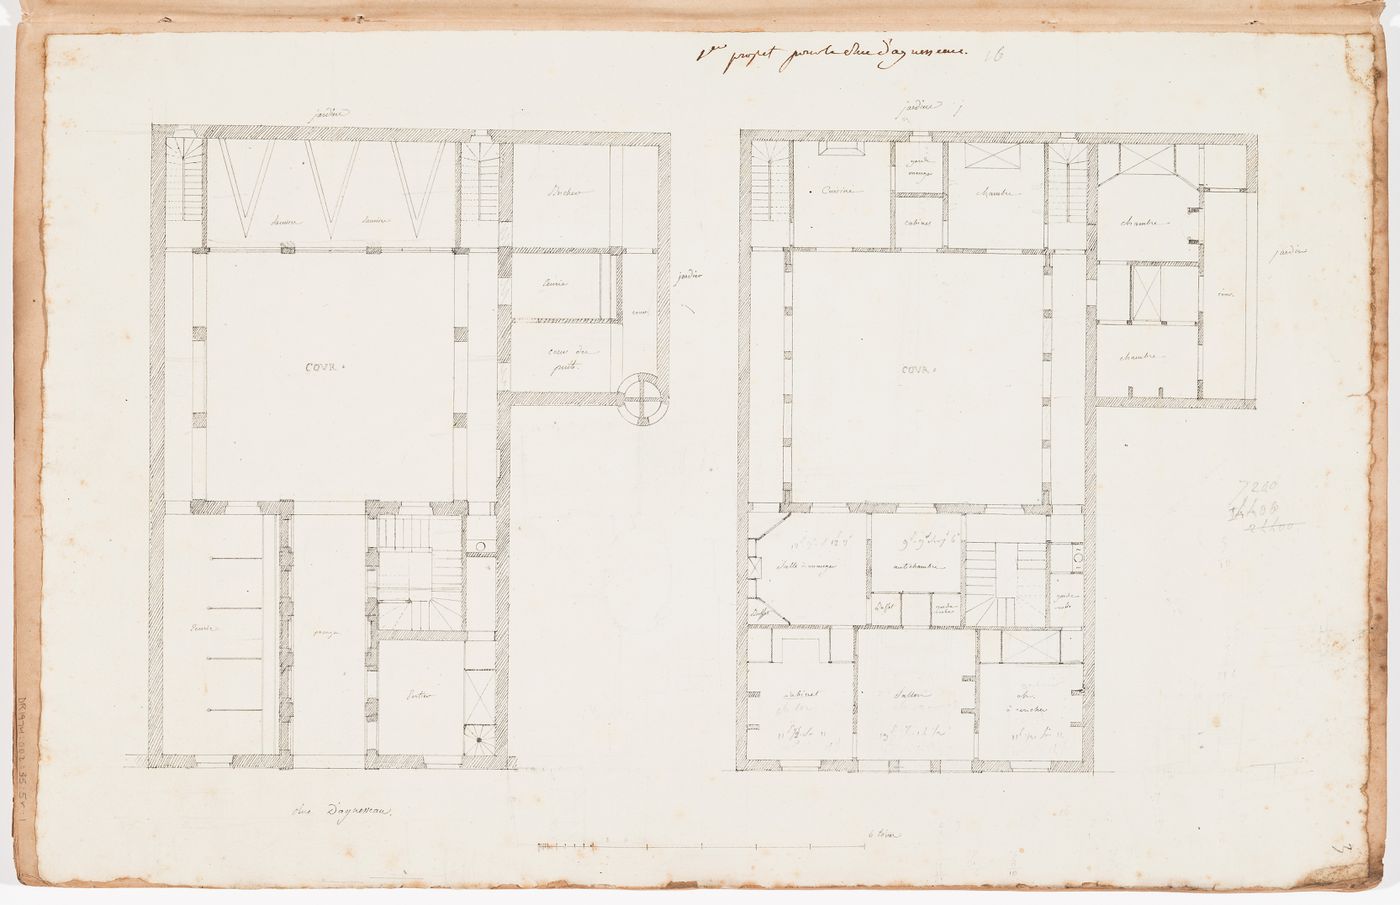 Plans for a house on rue d'Aguesseau, Paris; verso: Sketch elevation and plans for an unidentifed house